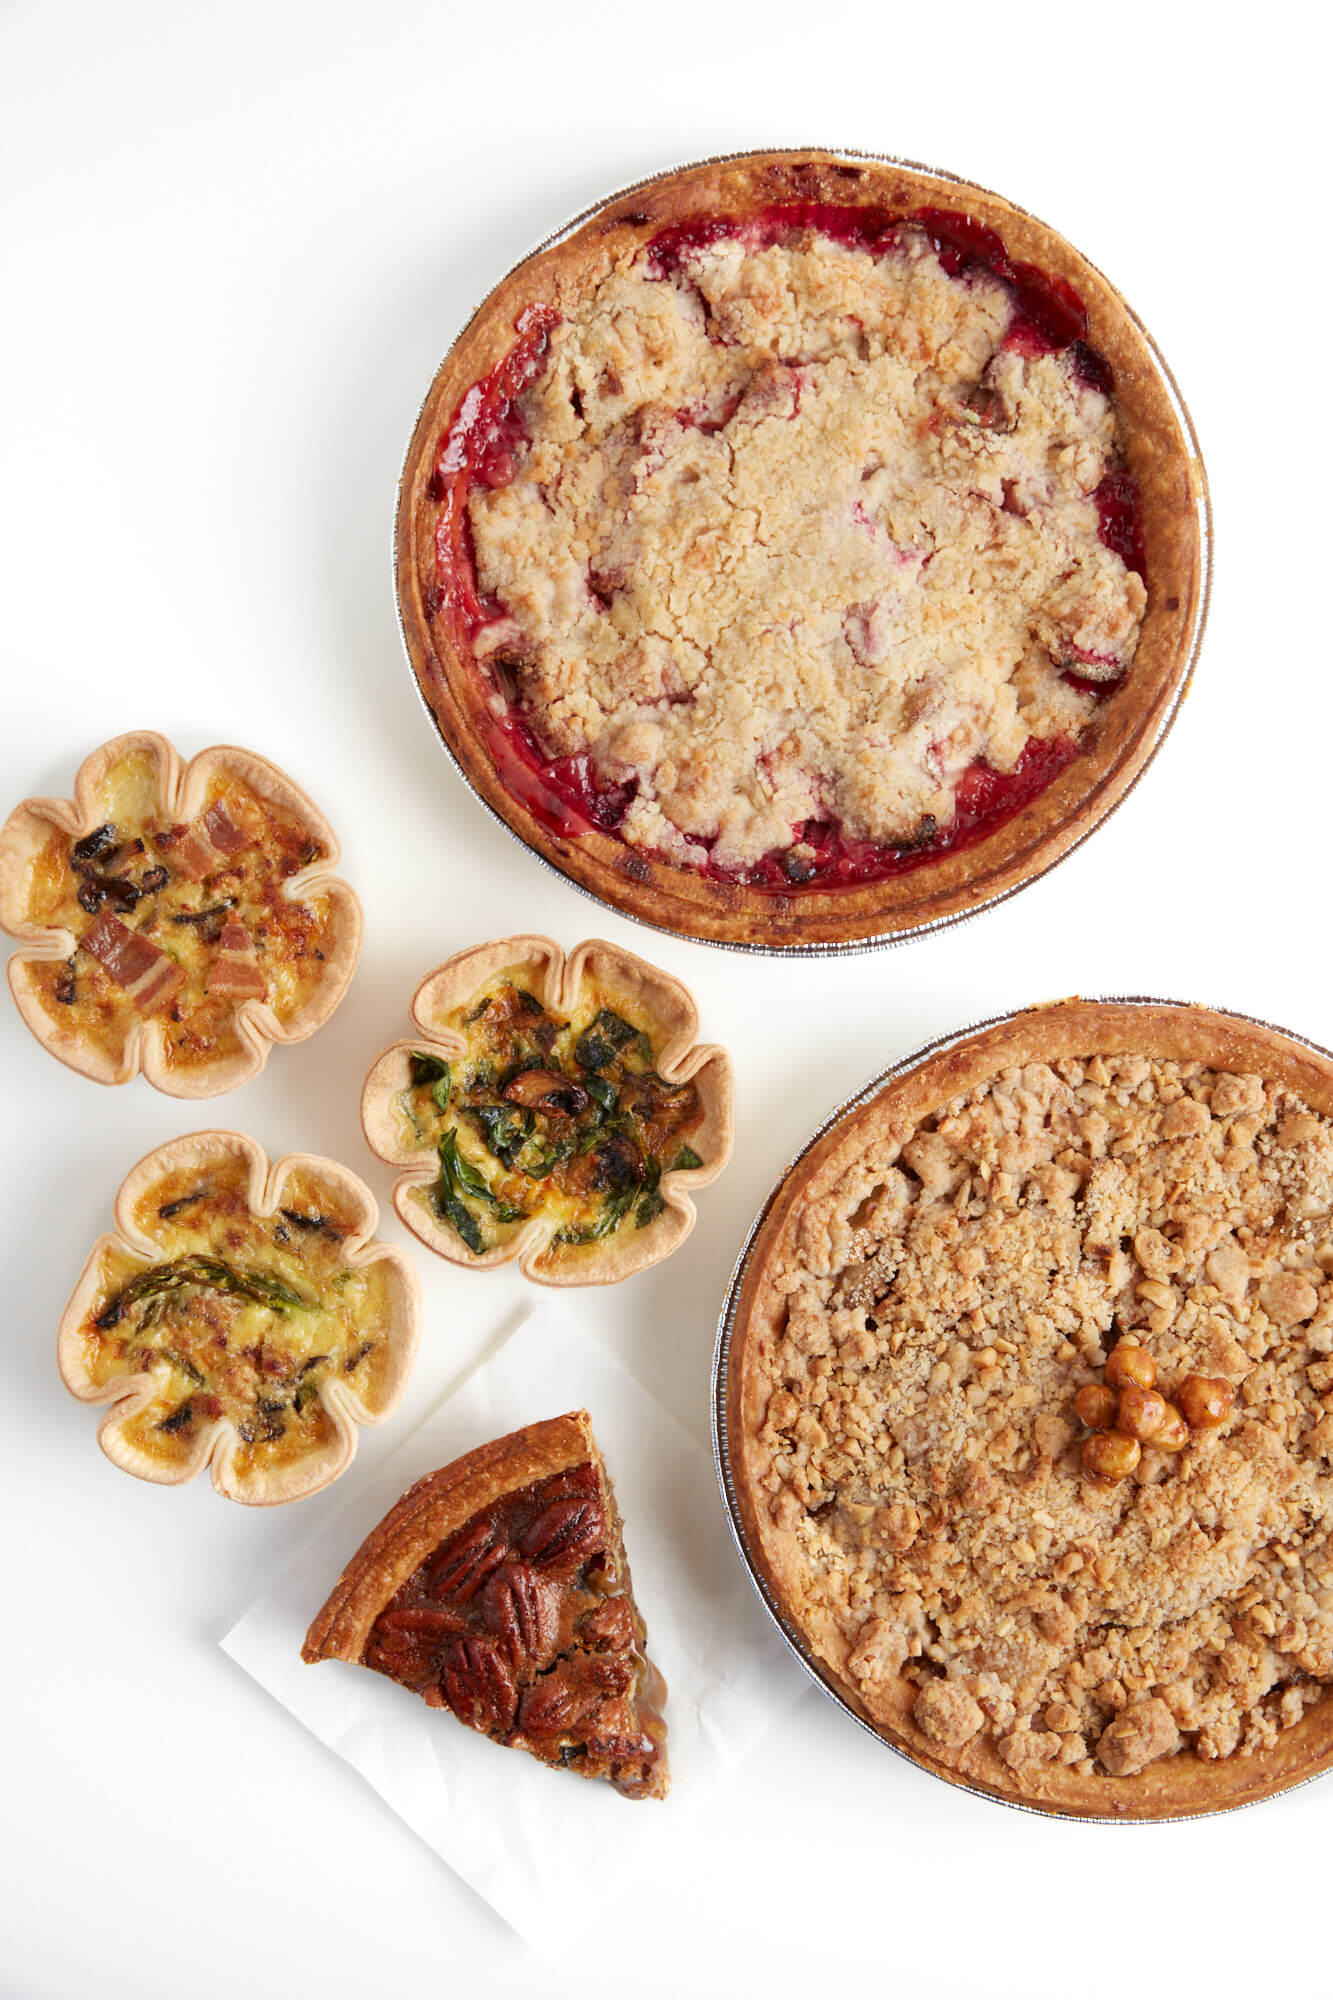 Birds eye view of a selection of Starter Bakery pies and quiches filled with seasonal fruit and vegetables